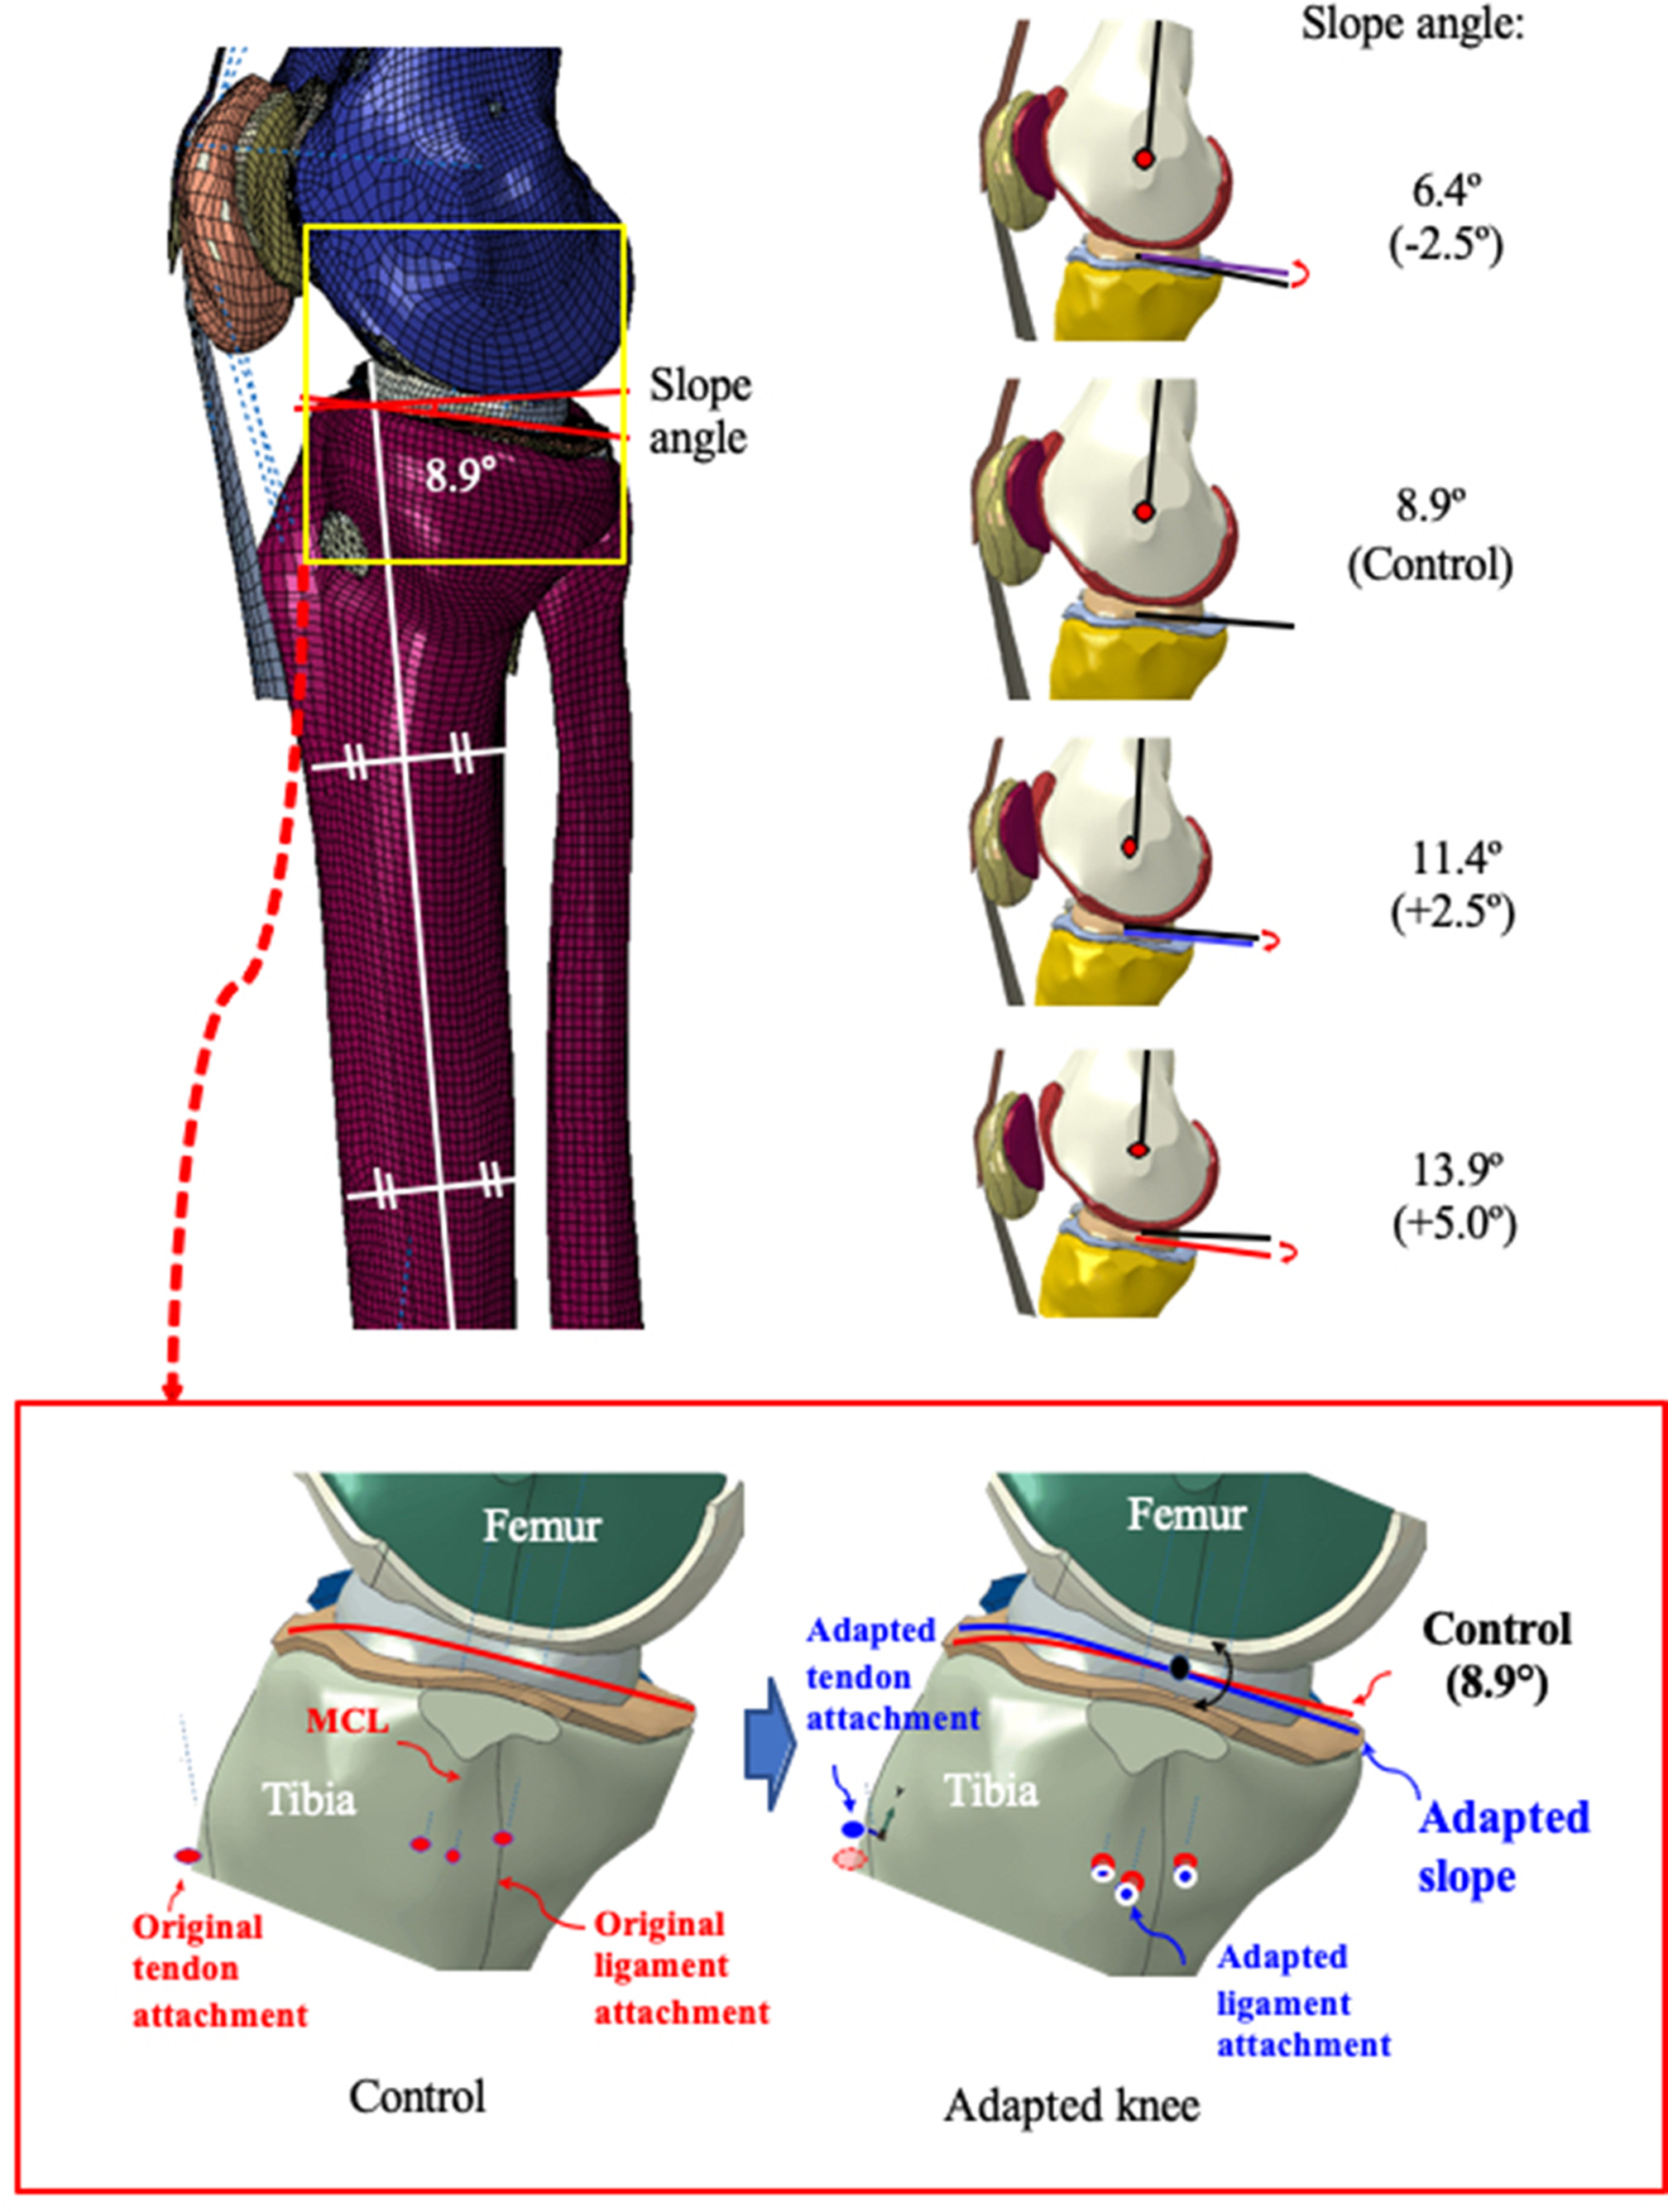 Fig. 2 
            Adapted knee model with different posterior tibial slope (PTS) angles in the tibial plateau. The muscle, ligament, and tendon attachments around the tibial plateau were correlately applied with modified PTS angles. MCL, medial cruciate ligament.
          